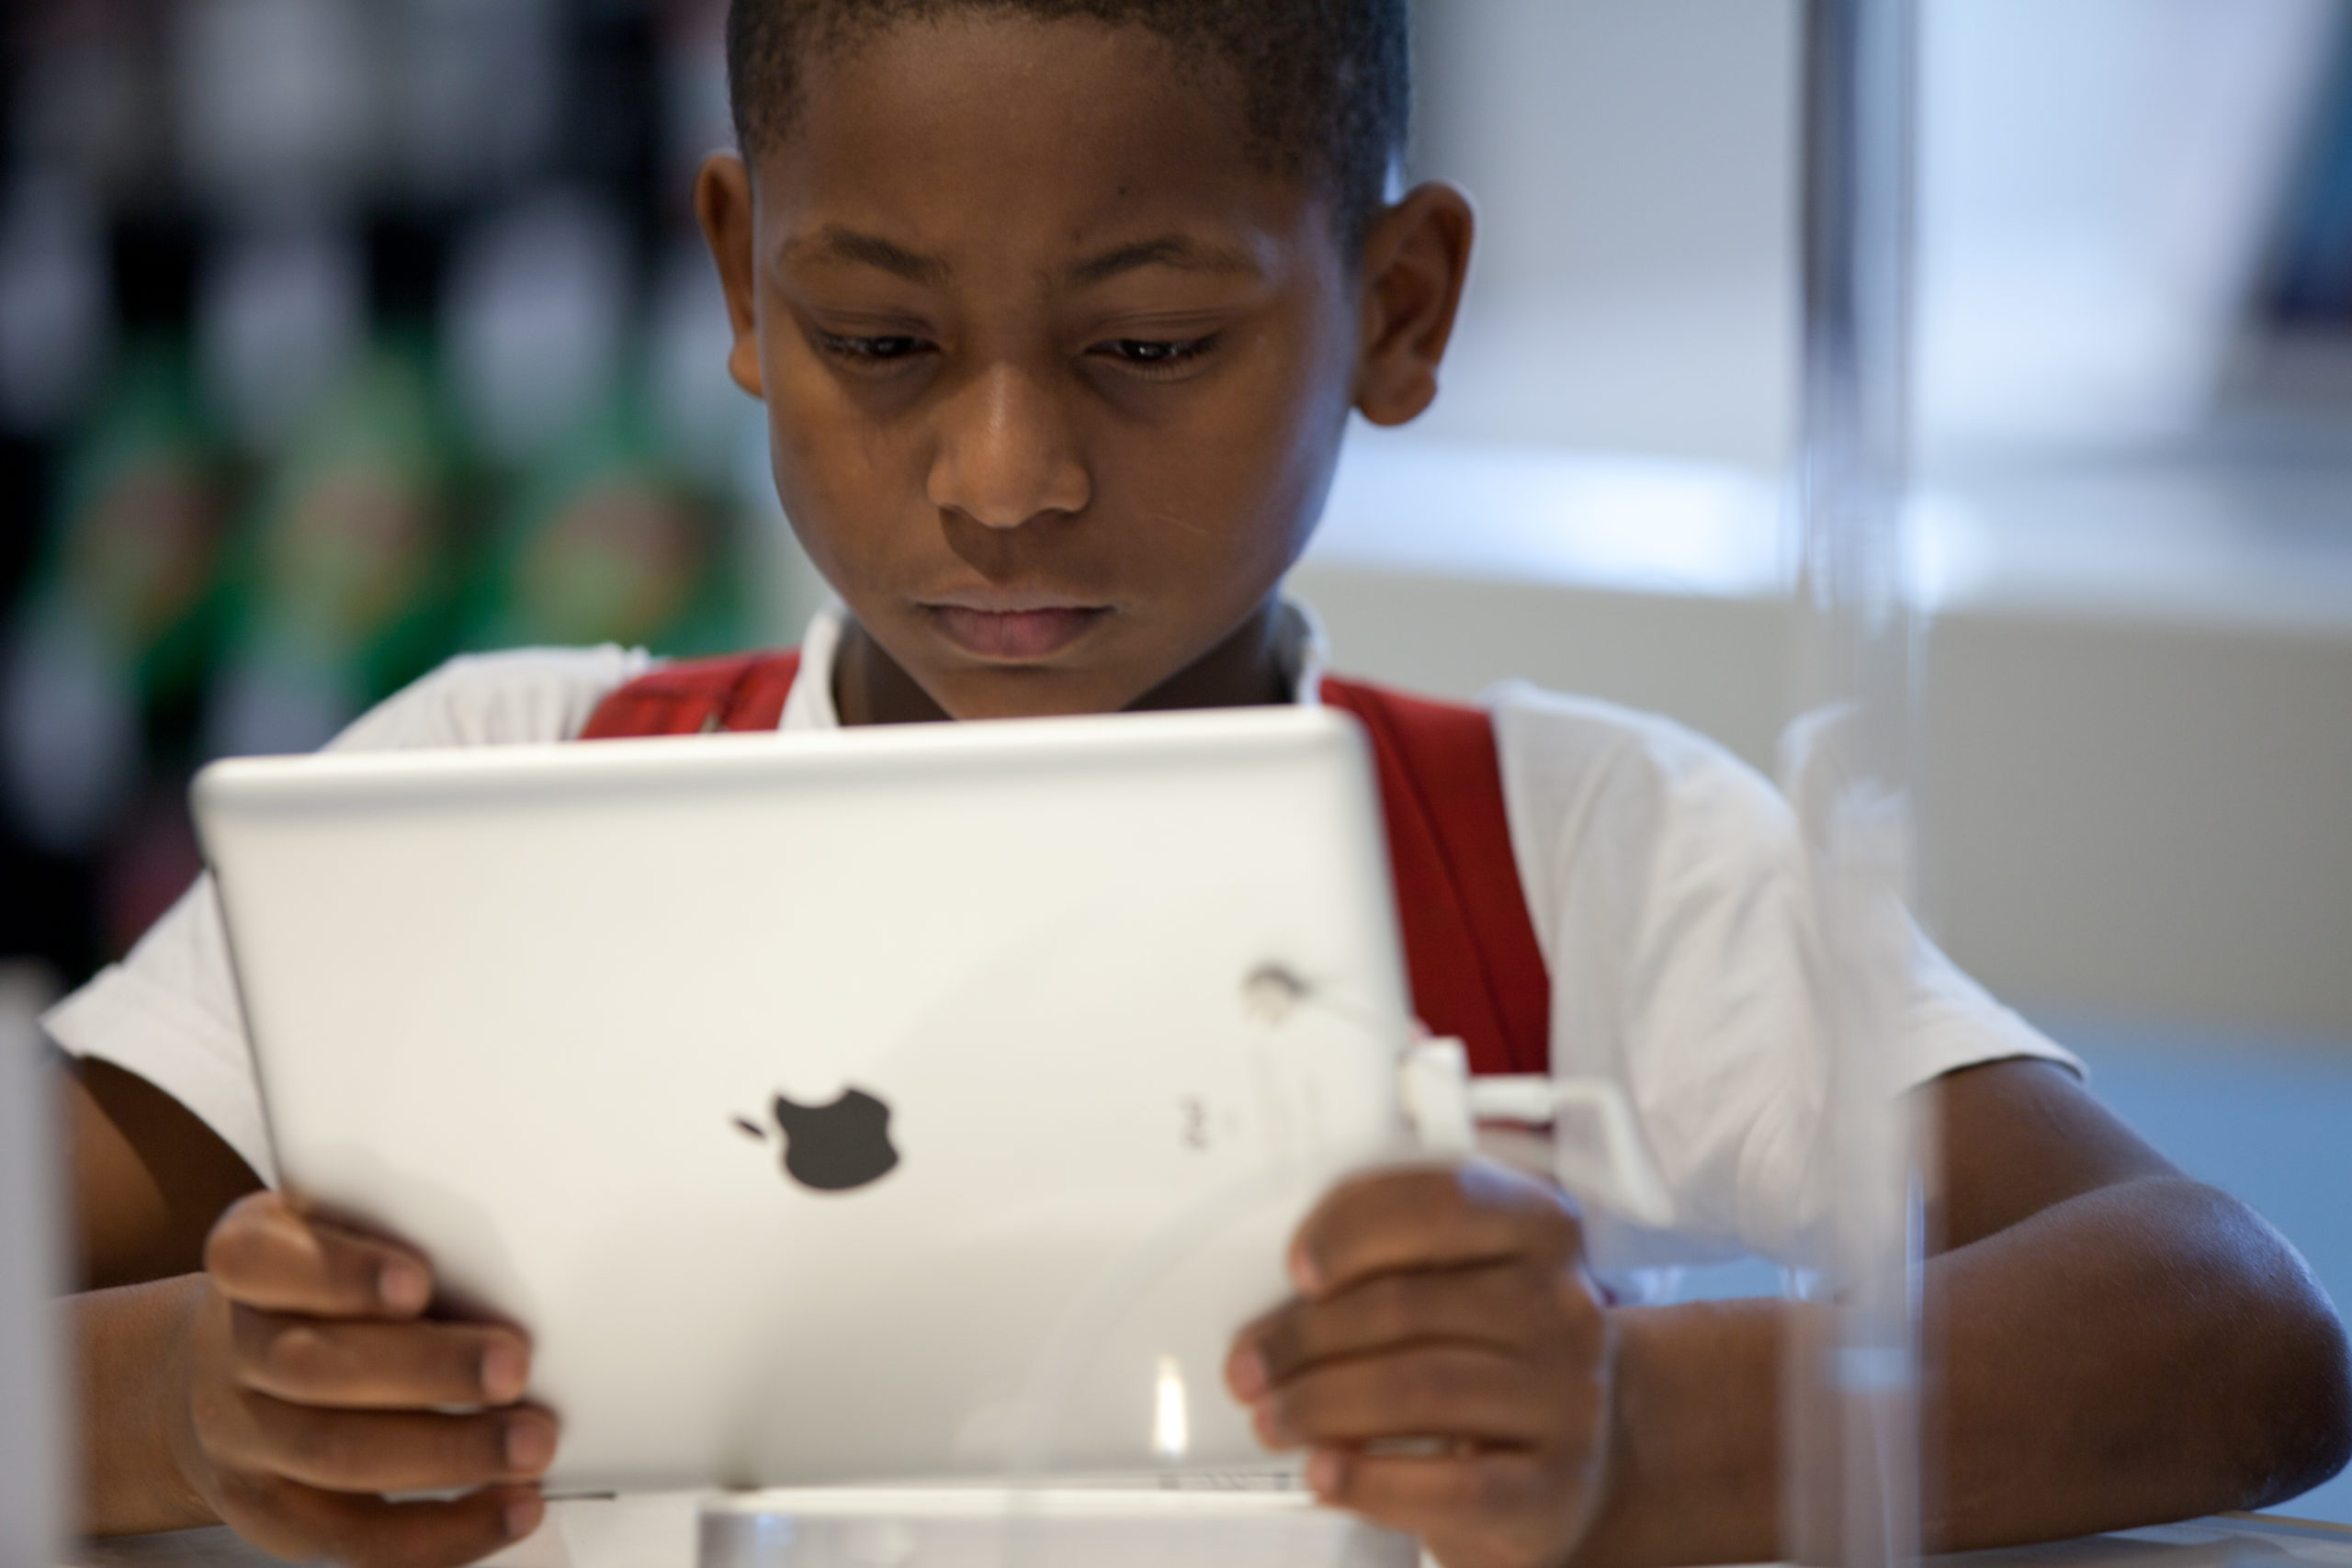 A Brazilian boy looks at an ipad at the retail shop of Apple products in Sao Paulo. Steve Jobs, co-founder and former CEO of Apple Inc, died on October 5, 2011 from cancer at 56. Jobs co-founded Apple in 1976 and is credited with marketing the world's first personal computer in addition to the popular iPod, iPhone and iPad. AFP PHOTO/YASUYOSHI CHIBA (Photo credit should read YASUYOSHI CHIBA/AFP via Getty Images)